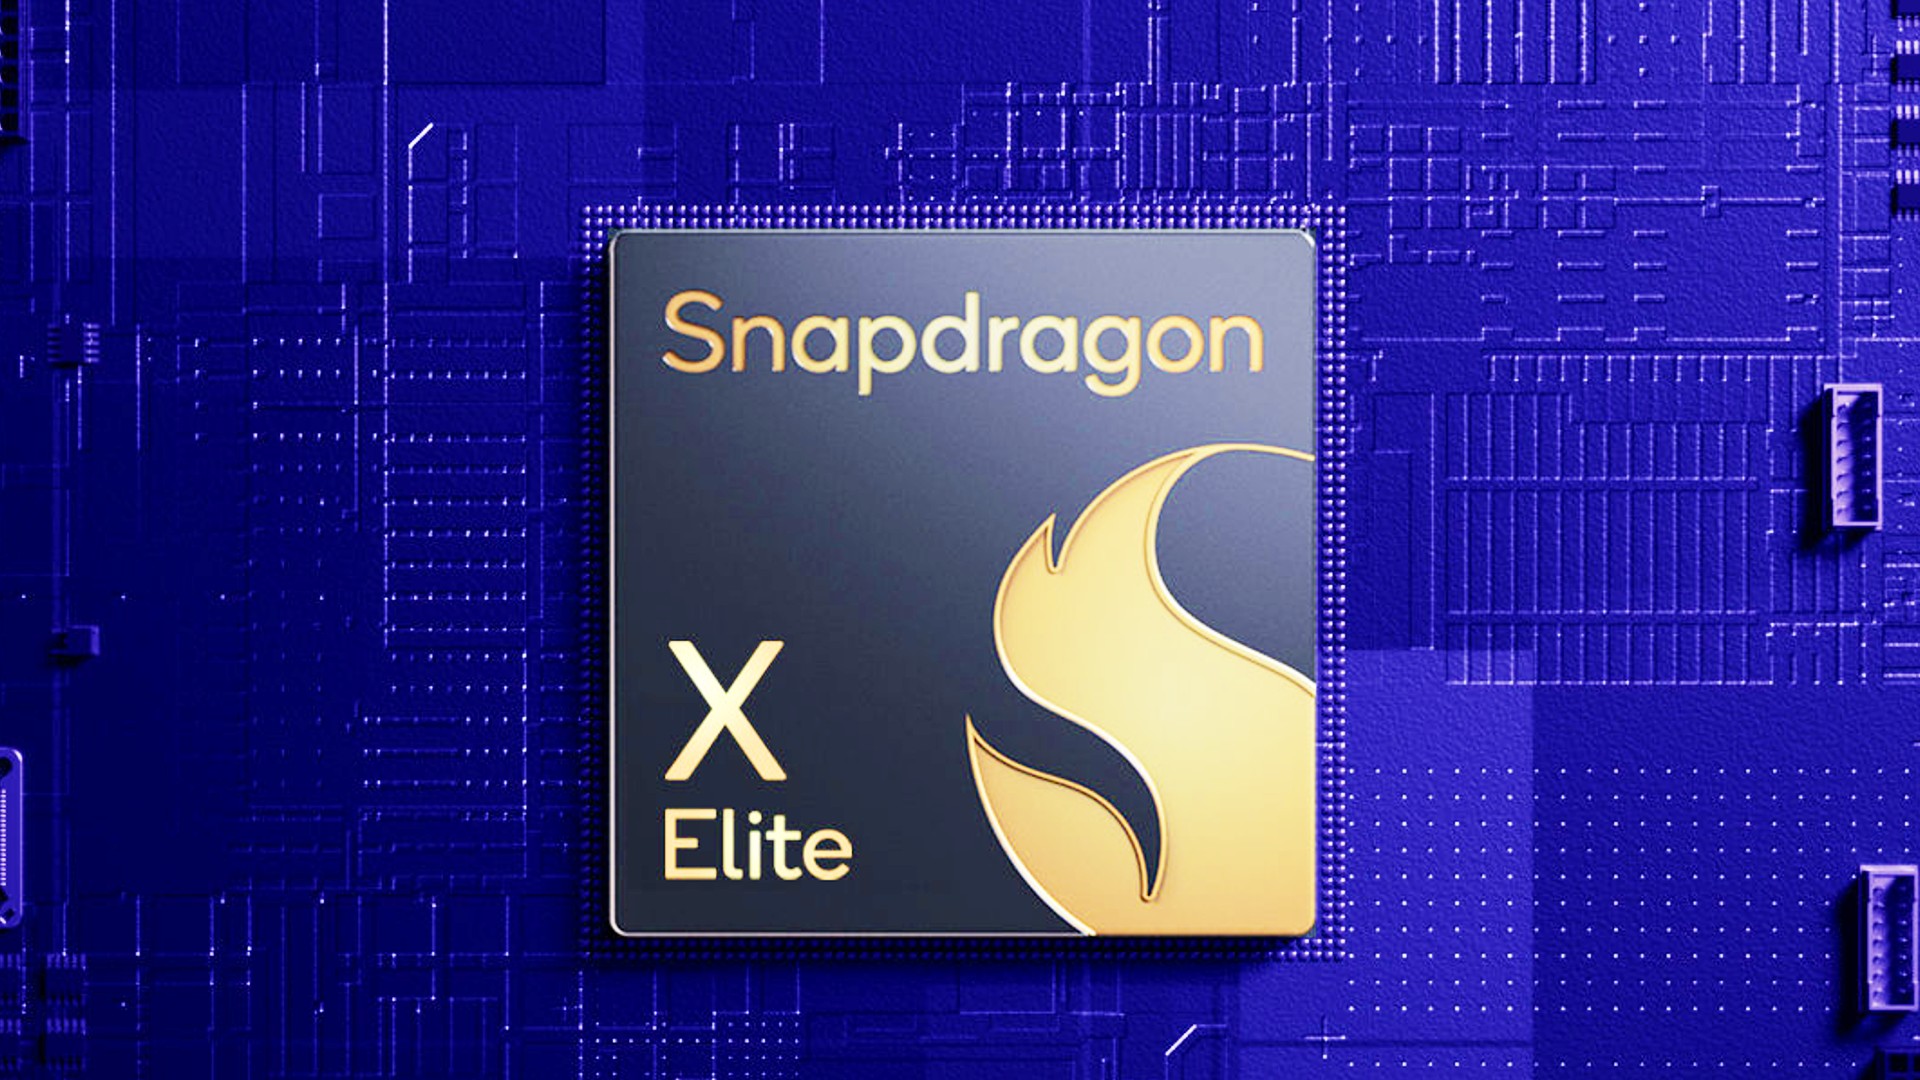 Qualcomm Snapdragon X gaming laptop performance proves disappointing